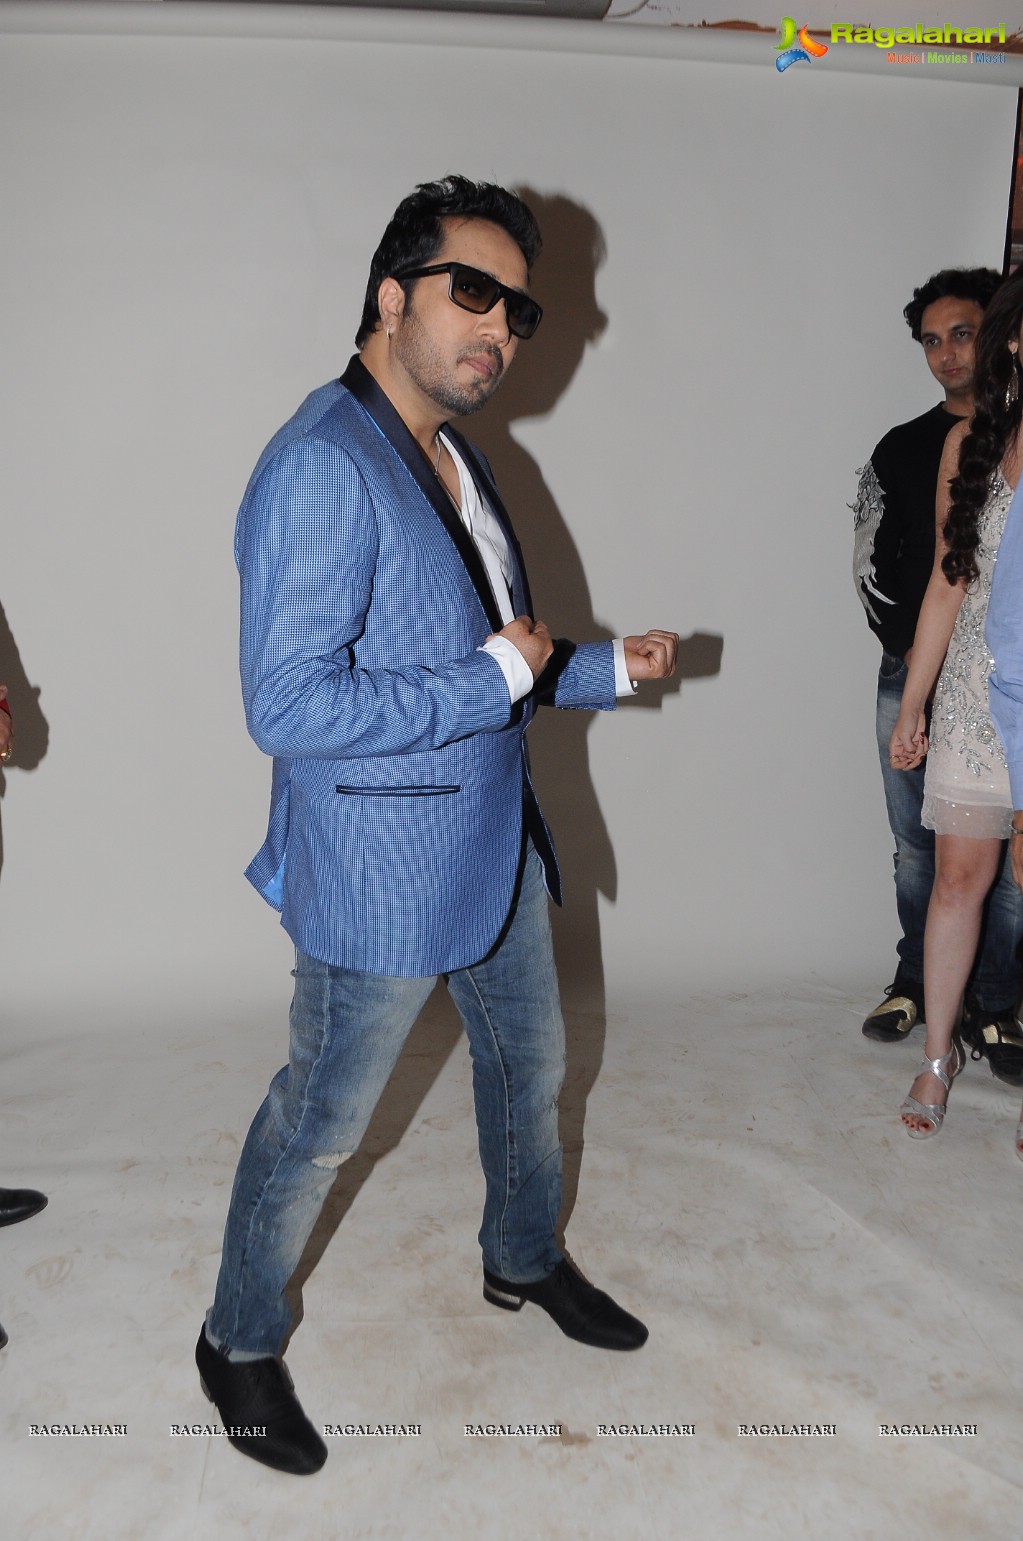 Singer Dilbagh Singh at the photoshoot of album 'BottomsUp' by House of Cheers with Mika Singh